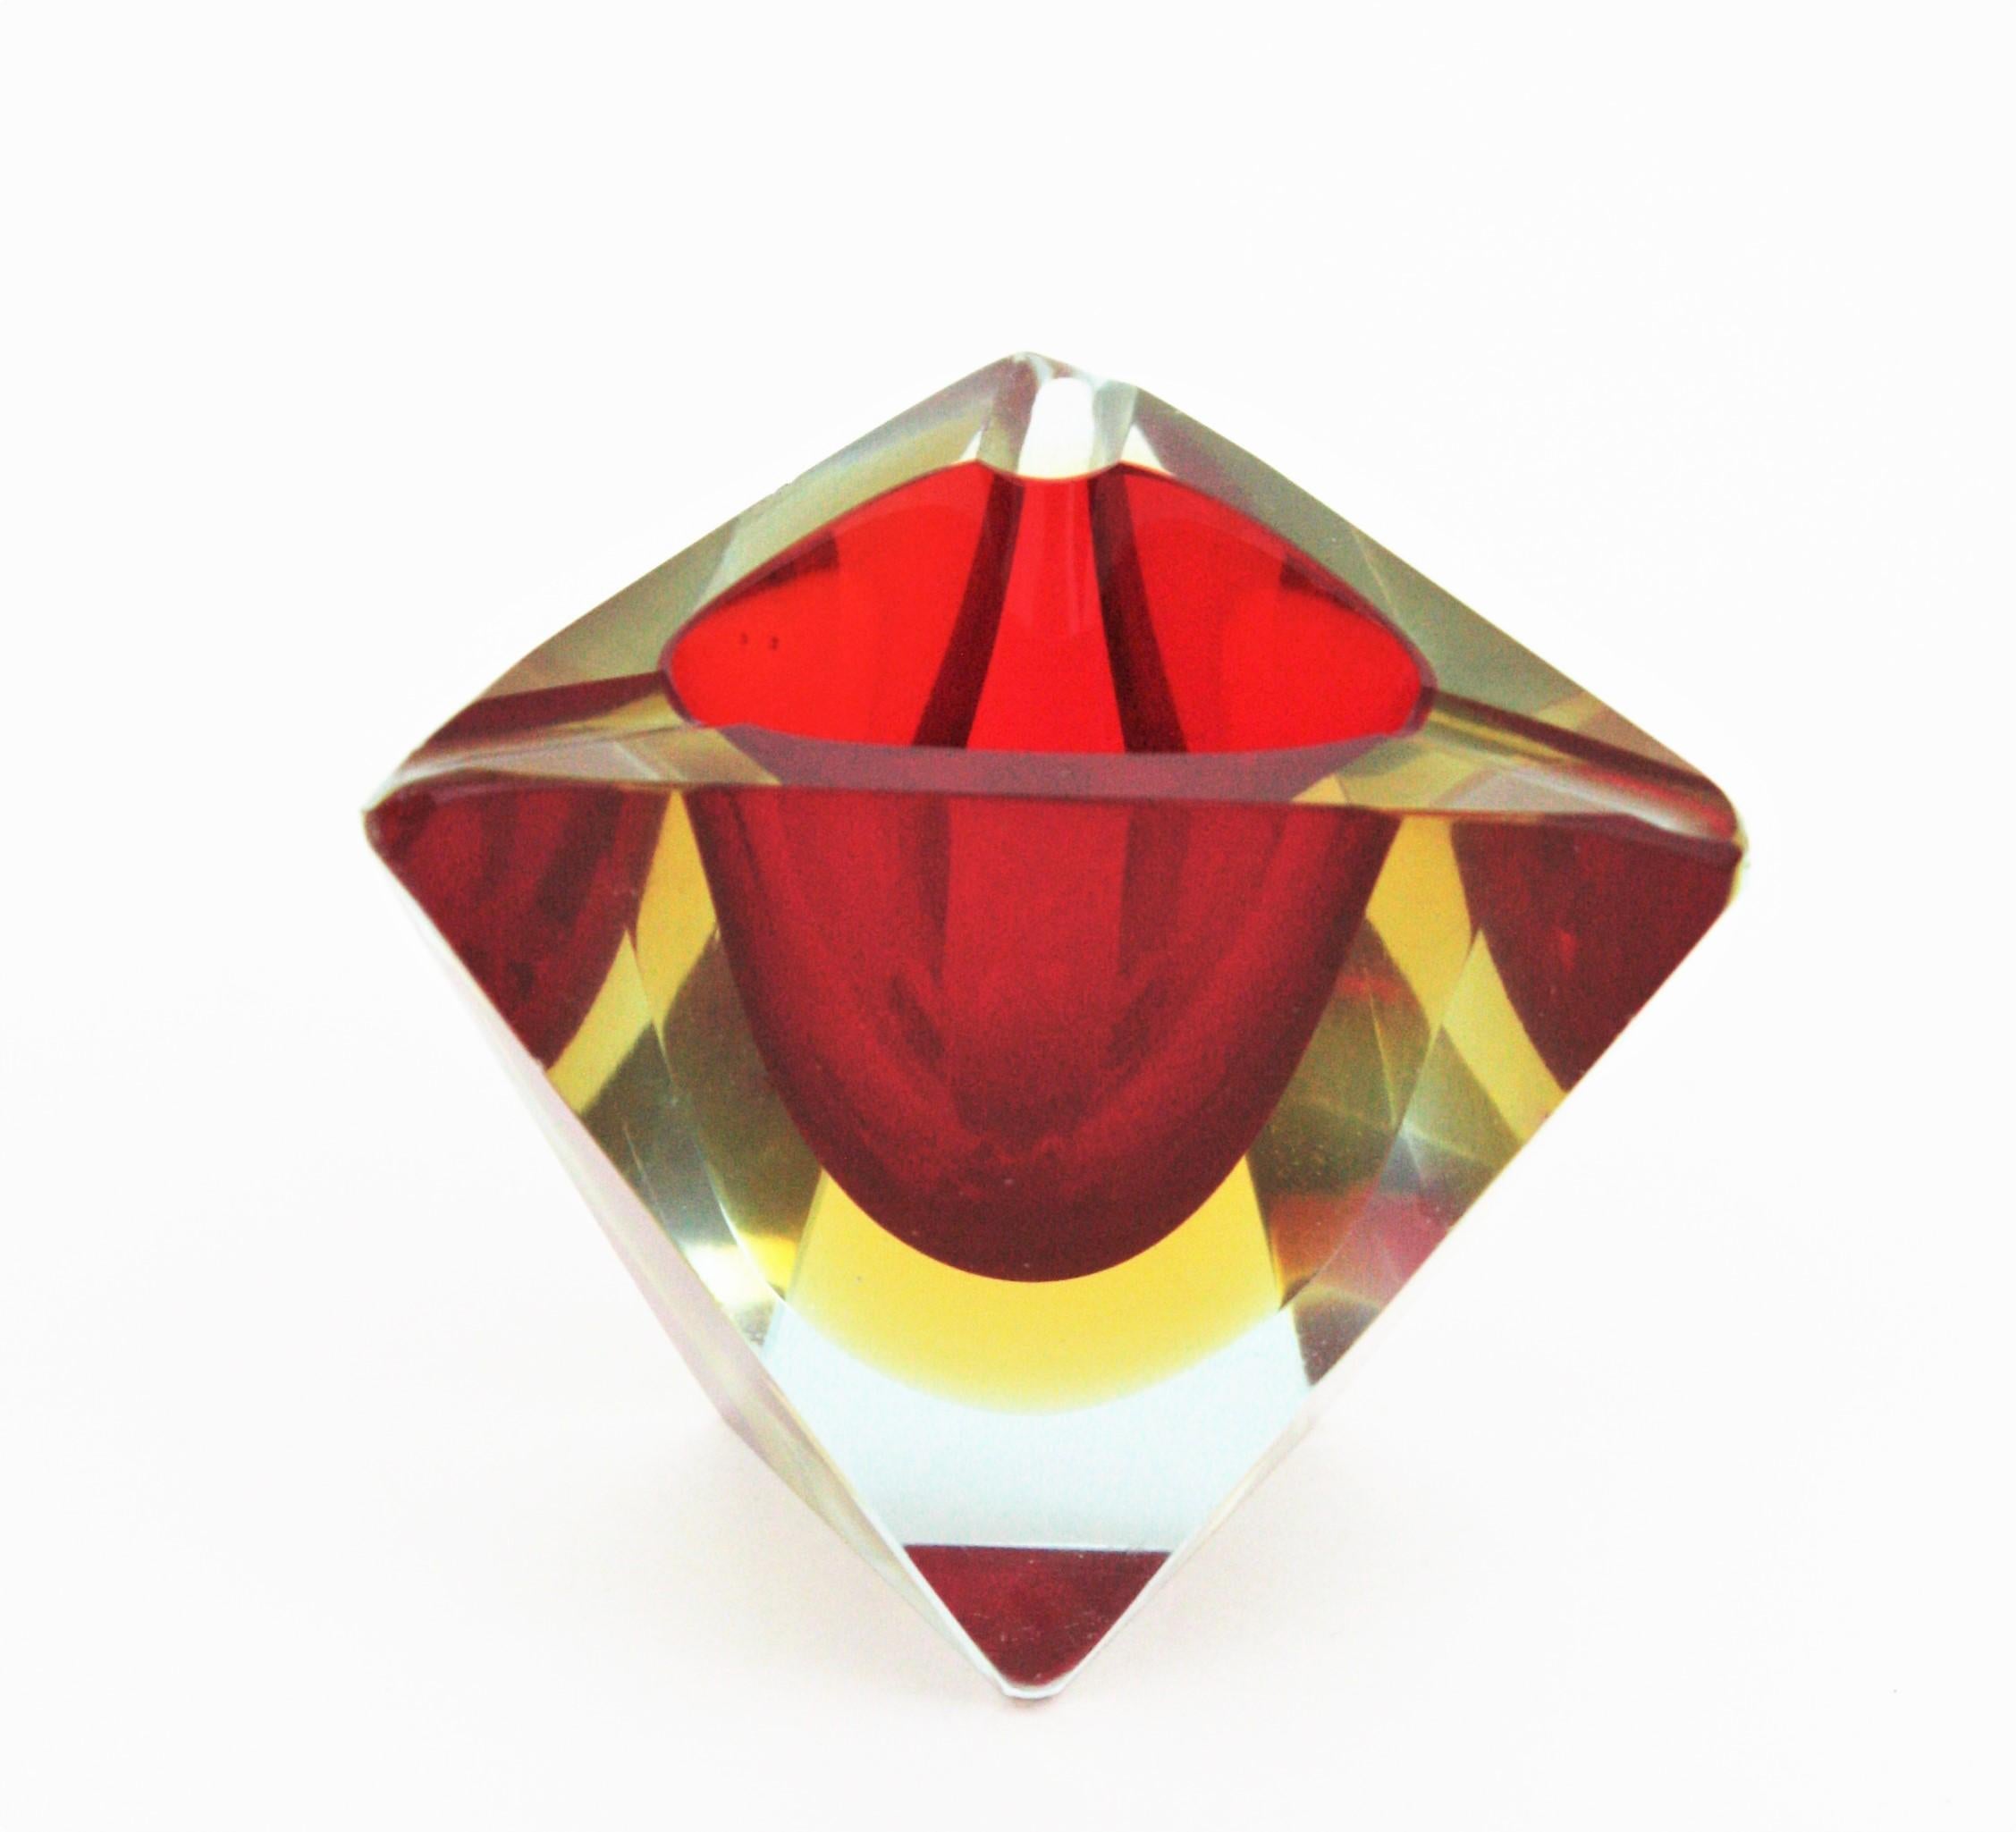 Mid-Century Modern Flavio Poli Murano Sommerso Red Yellow Faceted Triangular Glass Ashtray / Bowl For Sale